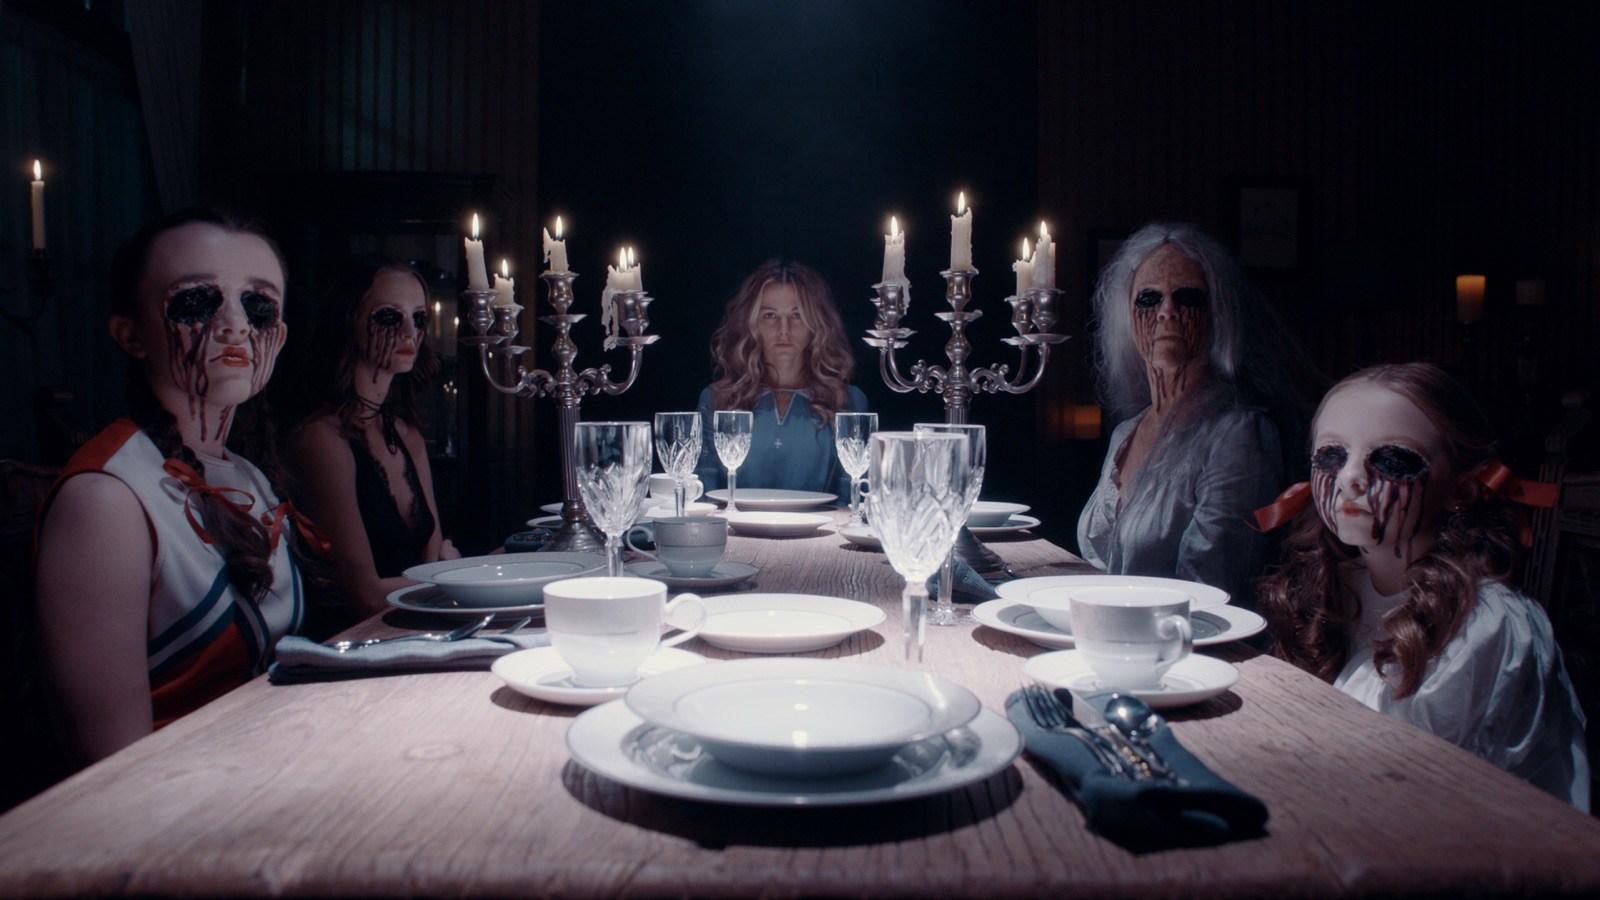 The ghosts around the table during the seance with Bojana Novakovic seated at the end centre in Malicious (2018)